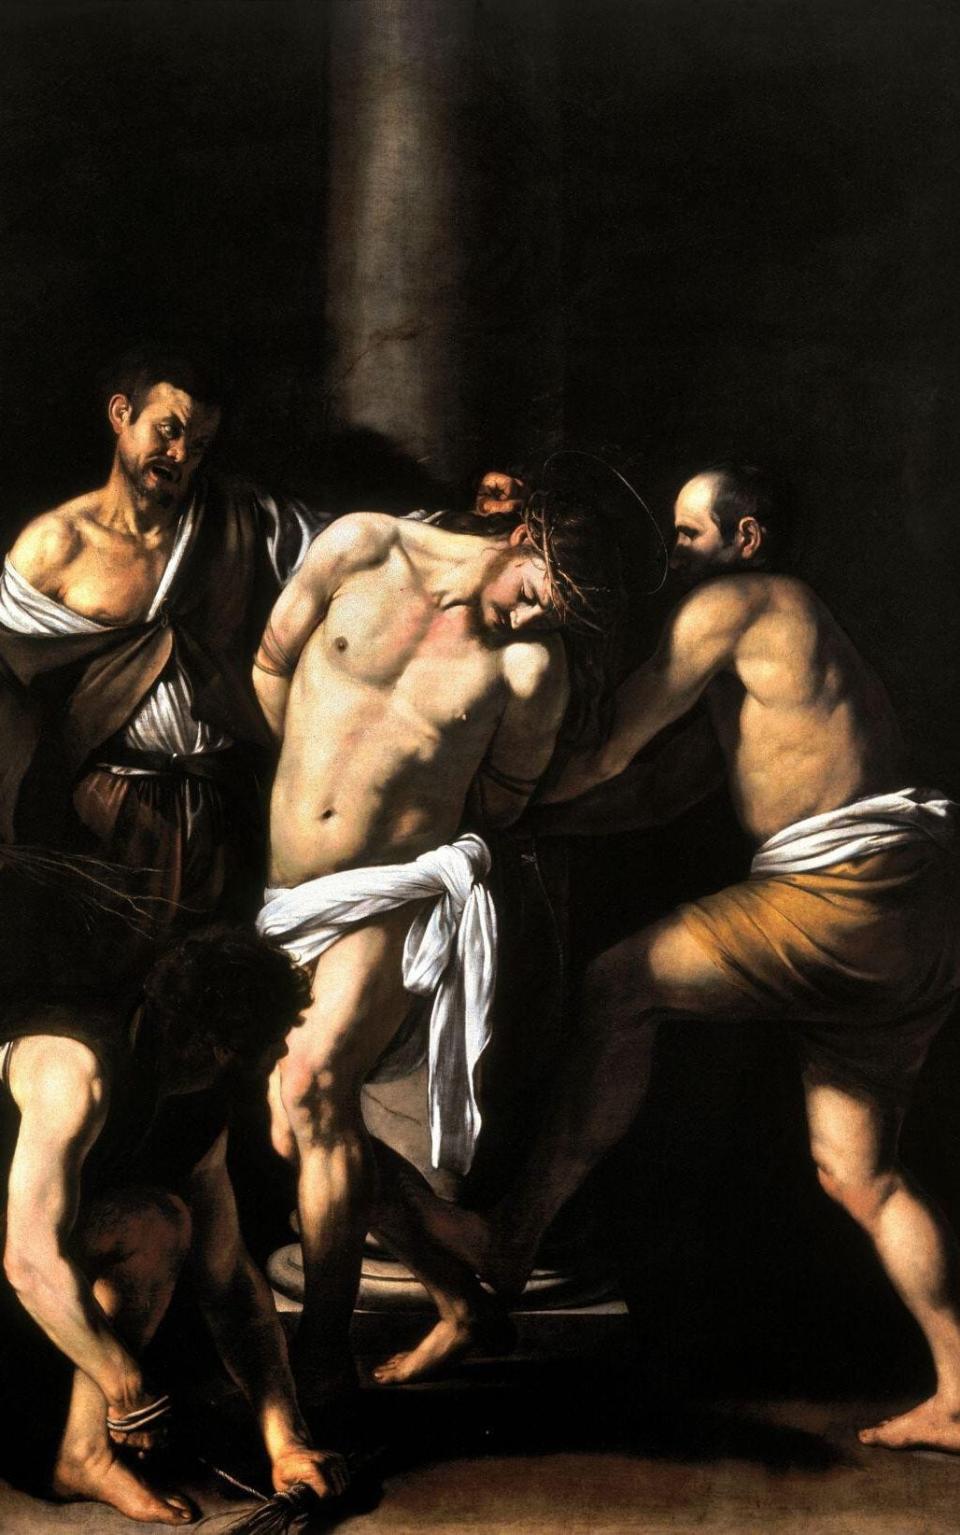 The Flagellation of Christ is one of Caravaggio's most famous paintings